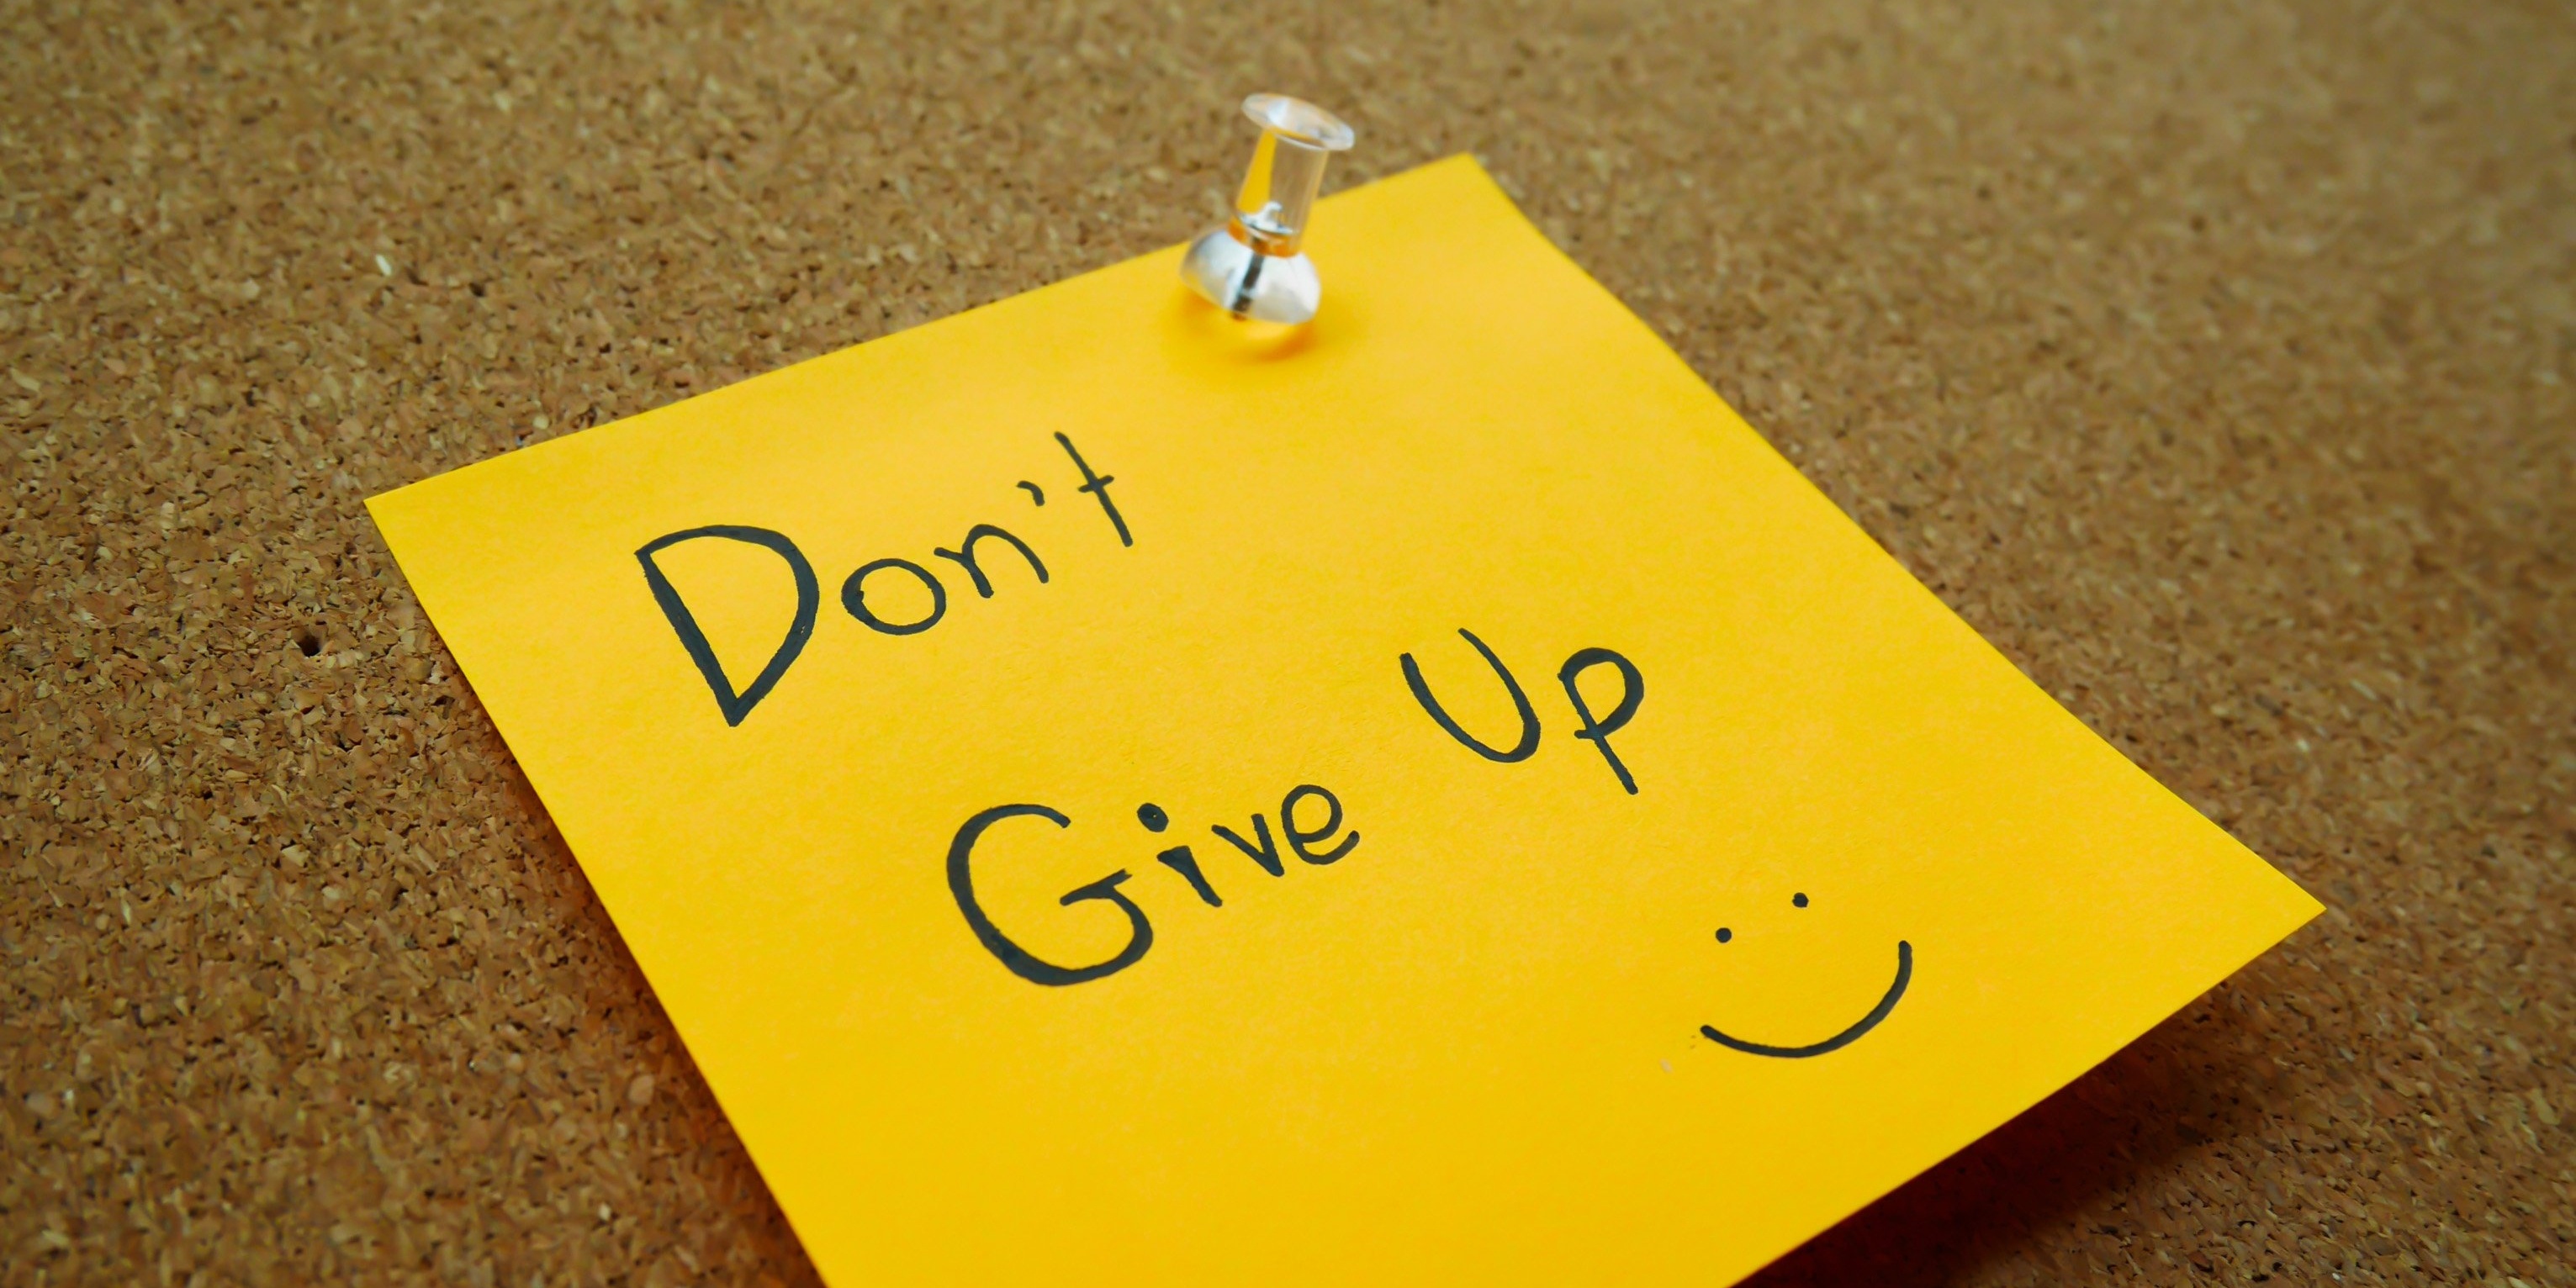 Taches dont. Don't give up картинка. Надпись don't give up. Give up обои. Фотография с надписью don't give up.